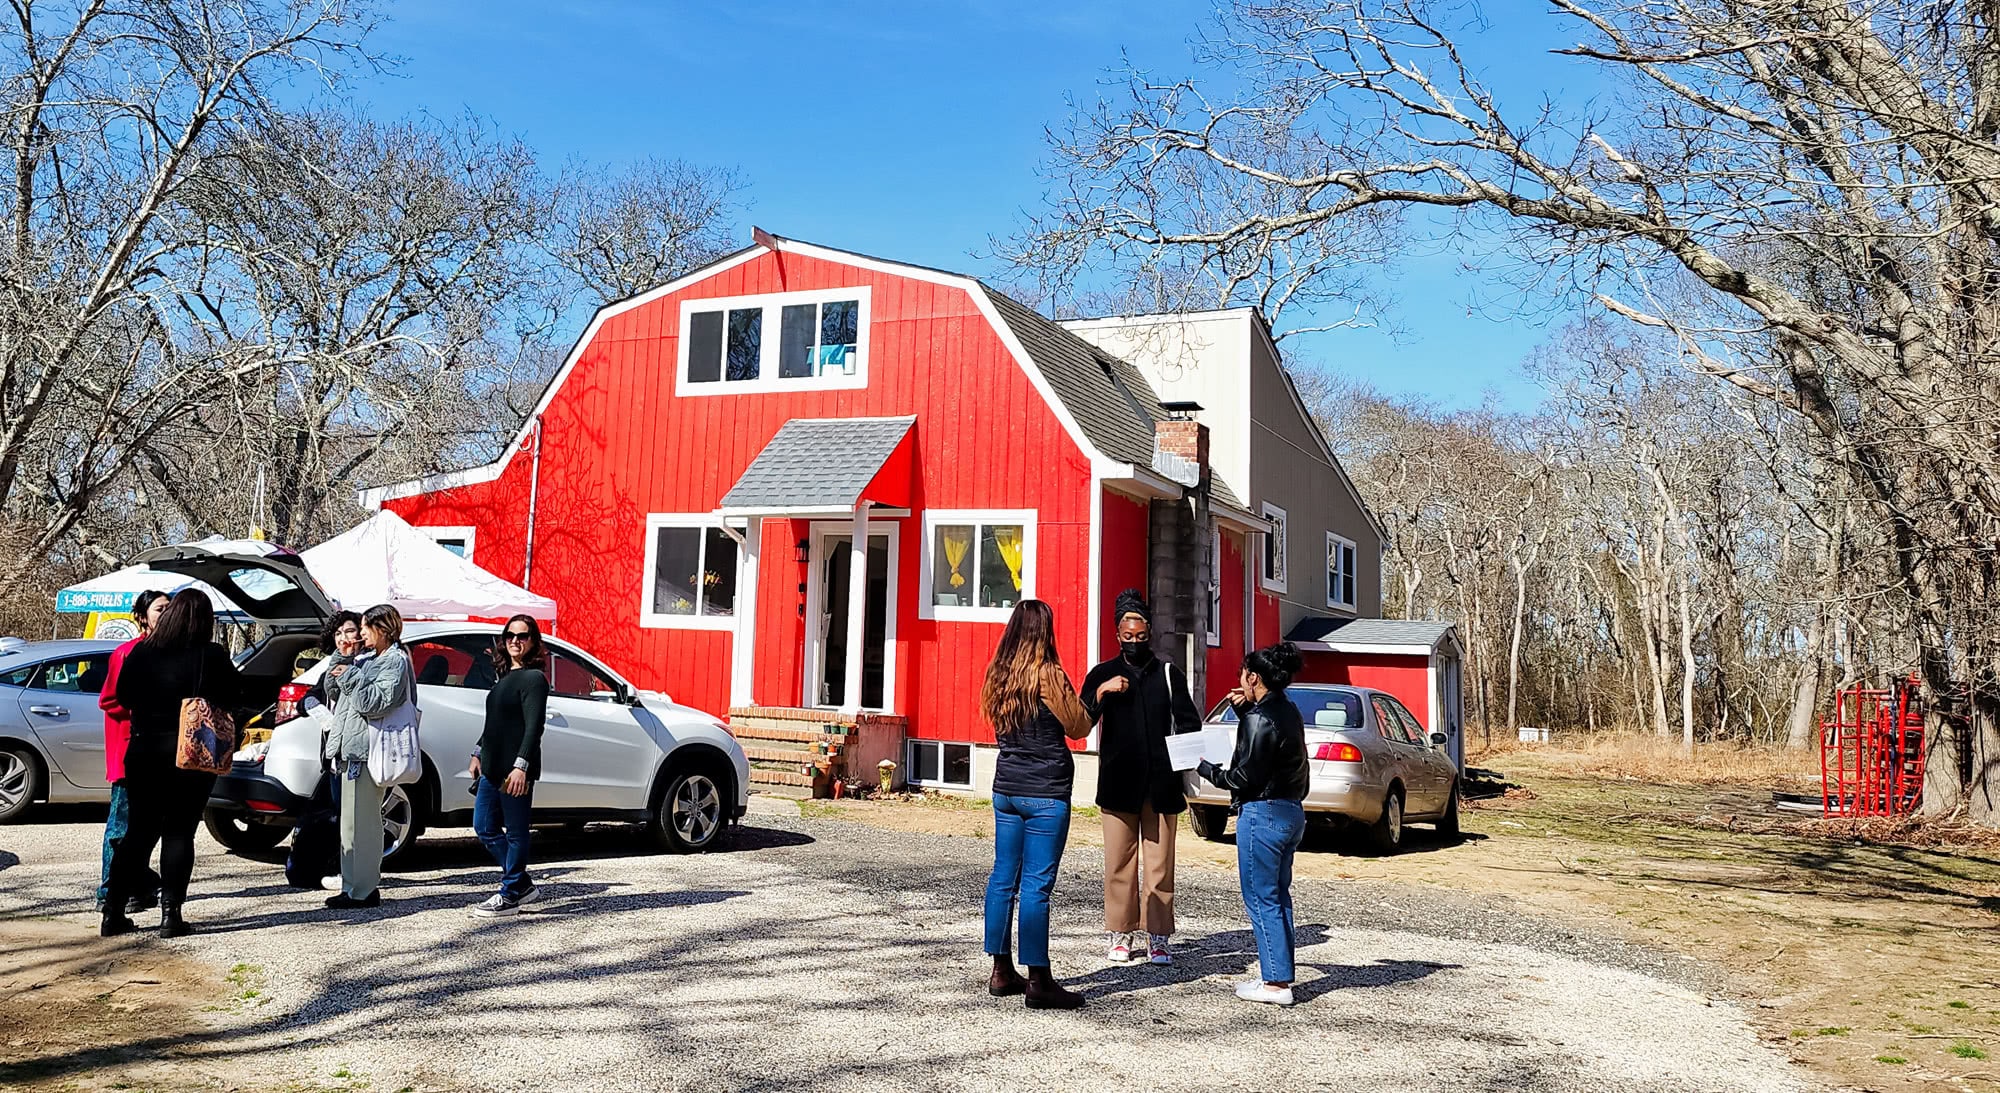 Ma’s House: A barn shaped house, painted red, against a blue sky in the background. People are gathered in small groups around the house, in mid-conversation.